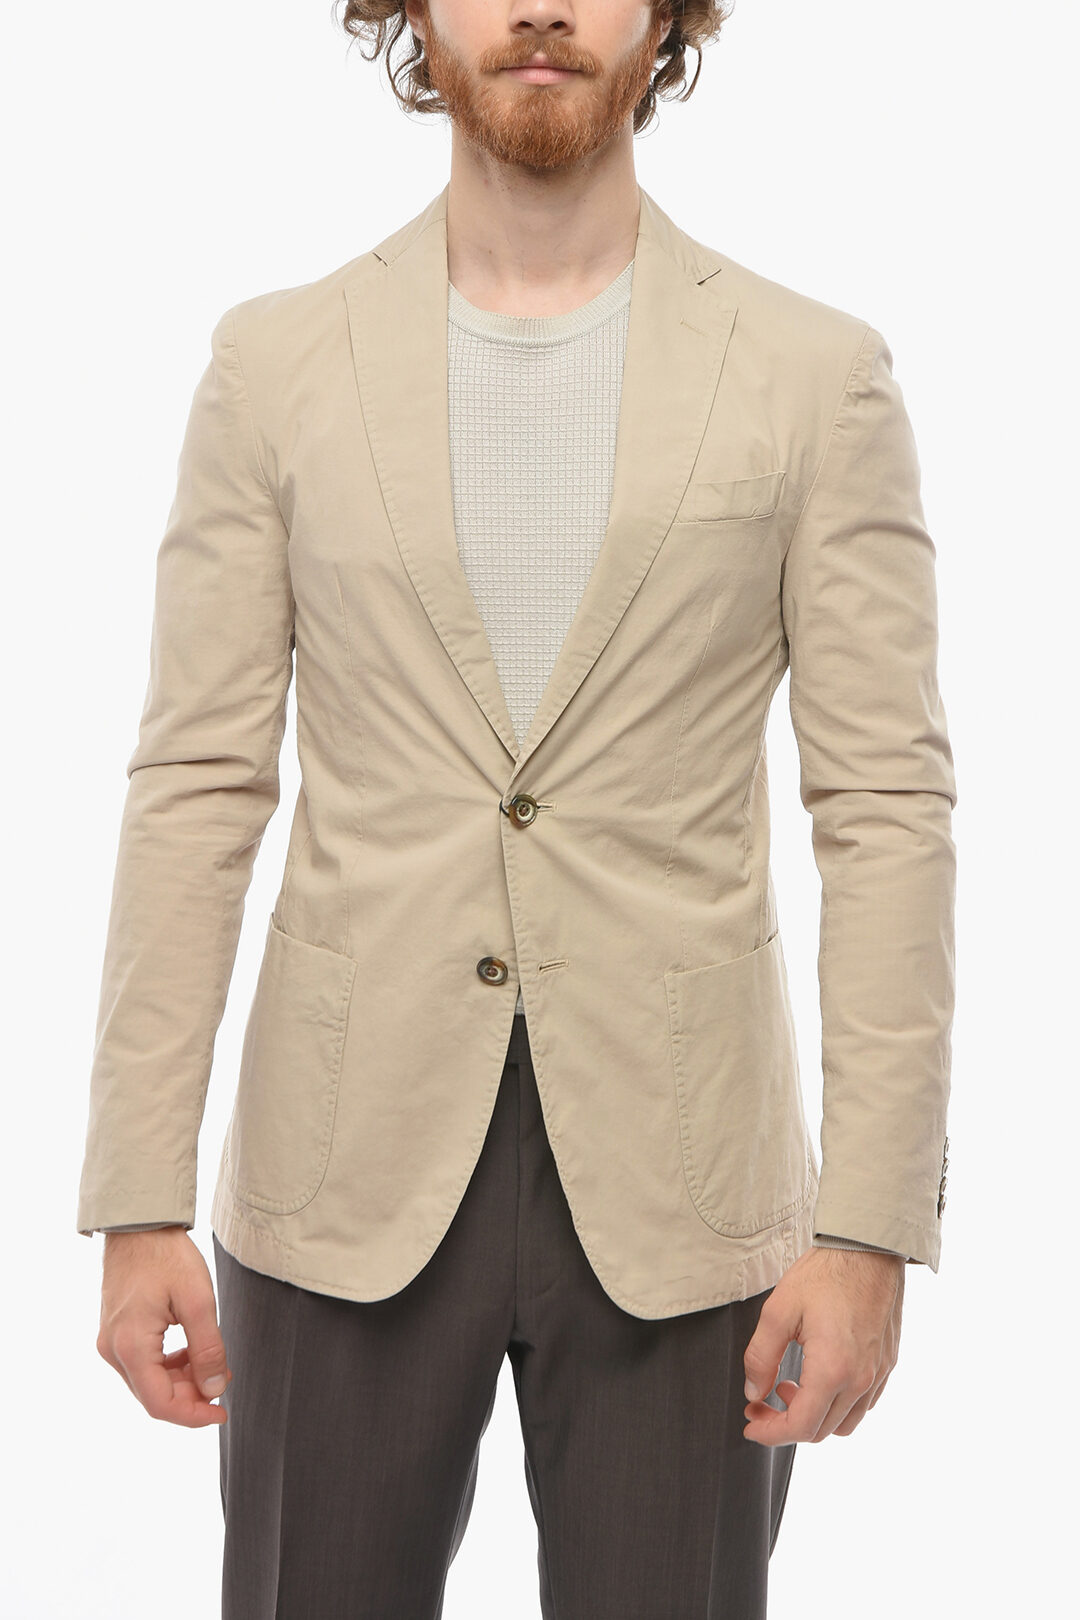 Corneliani CC COLLECTION Unlined Two-buttoned Blazer men - Glamood Outlet